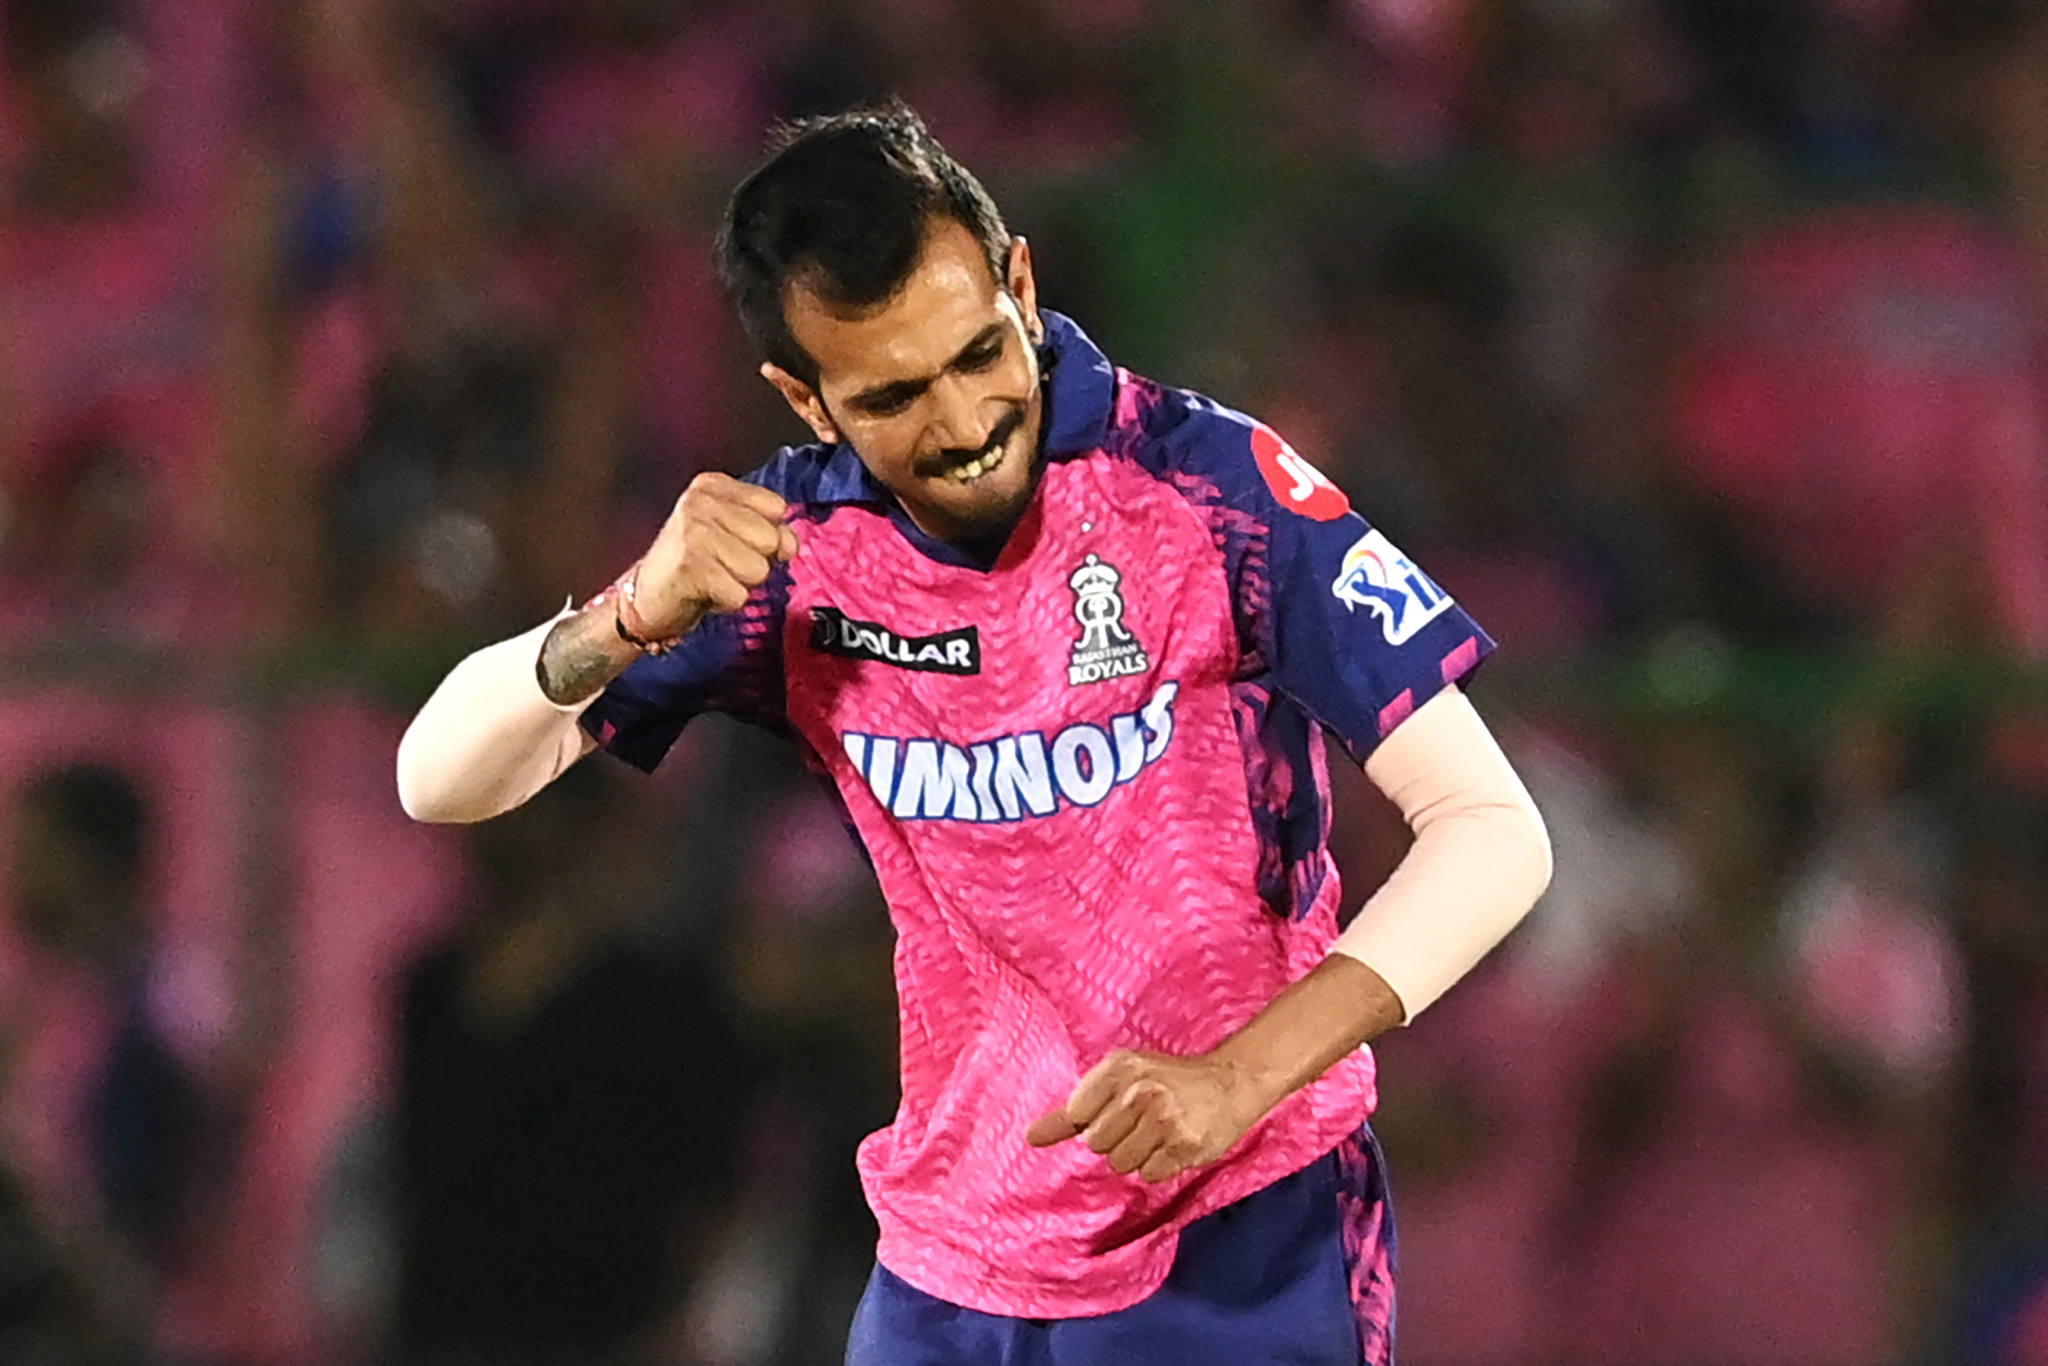 Rajasthan Royals star Yuzvendra Chahal was among those to support the fundraising efforts for crash victims ©Getty Images